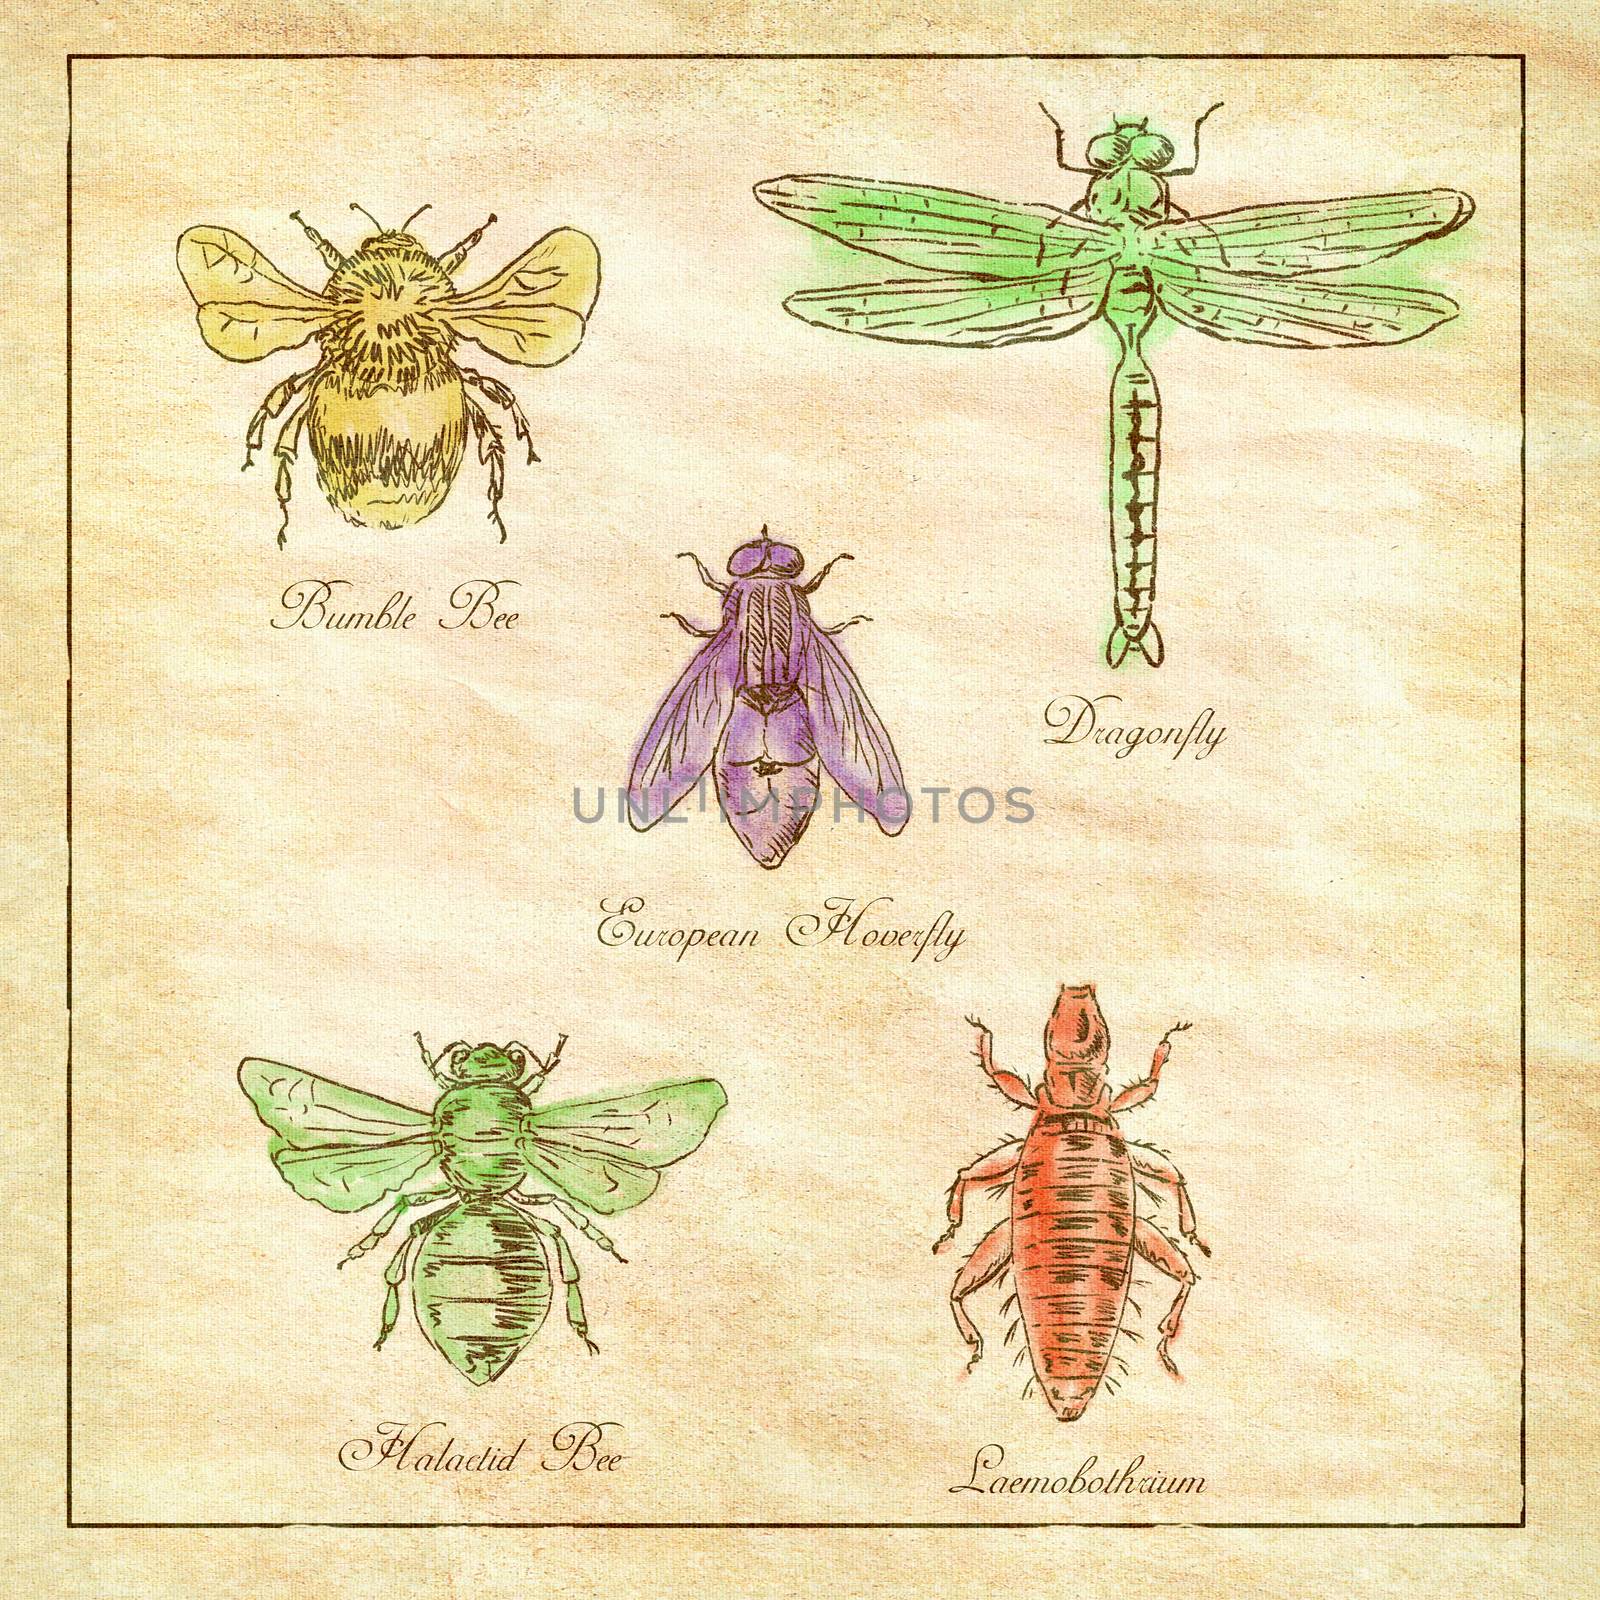 Vintage drawing illustration of a collection of insects like the Bumble Bee, European Hoverfly, Dragonfly, Hlalactid Bee, and Lice  in color on antique paper.